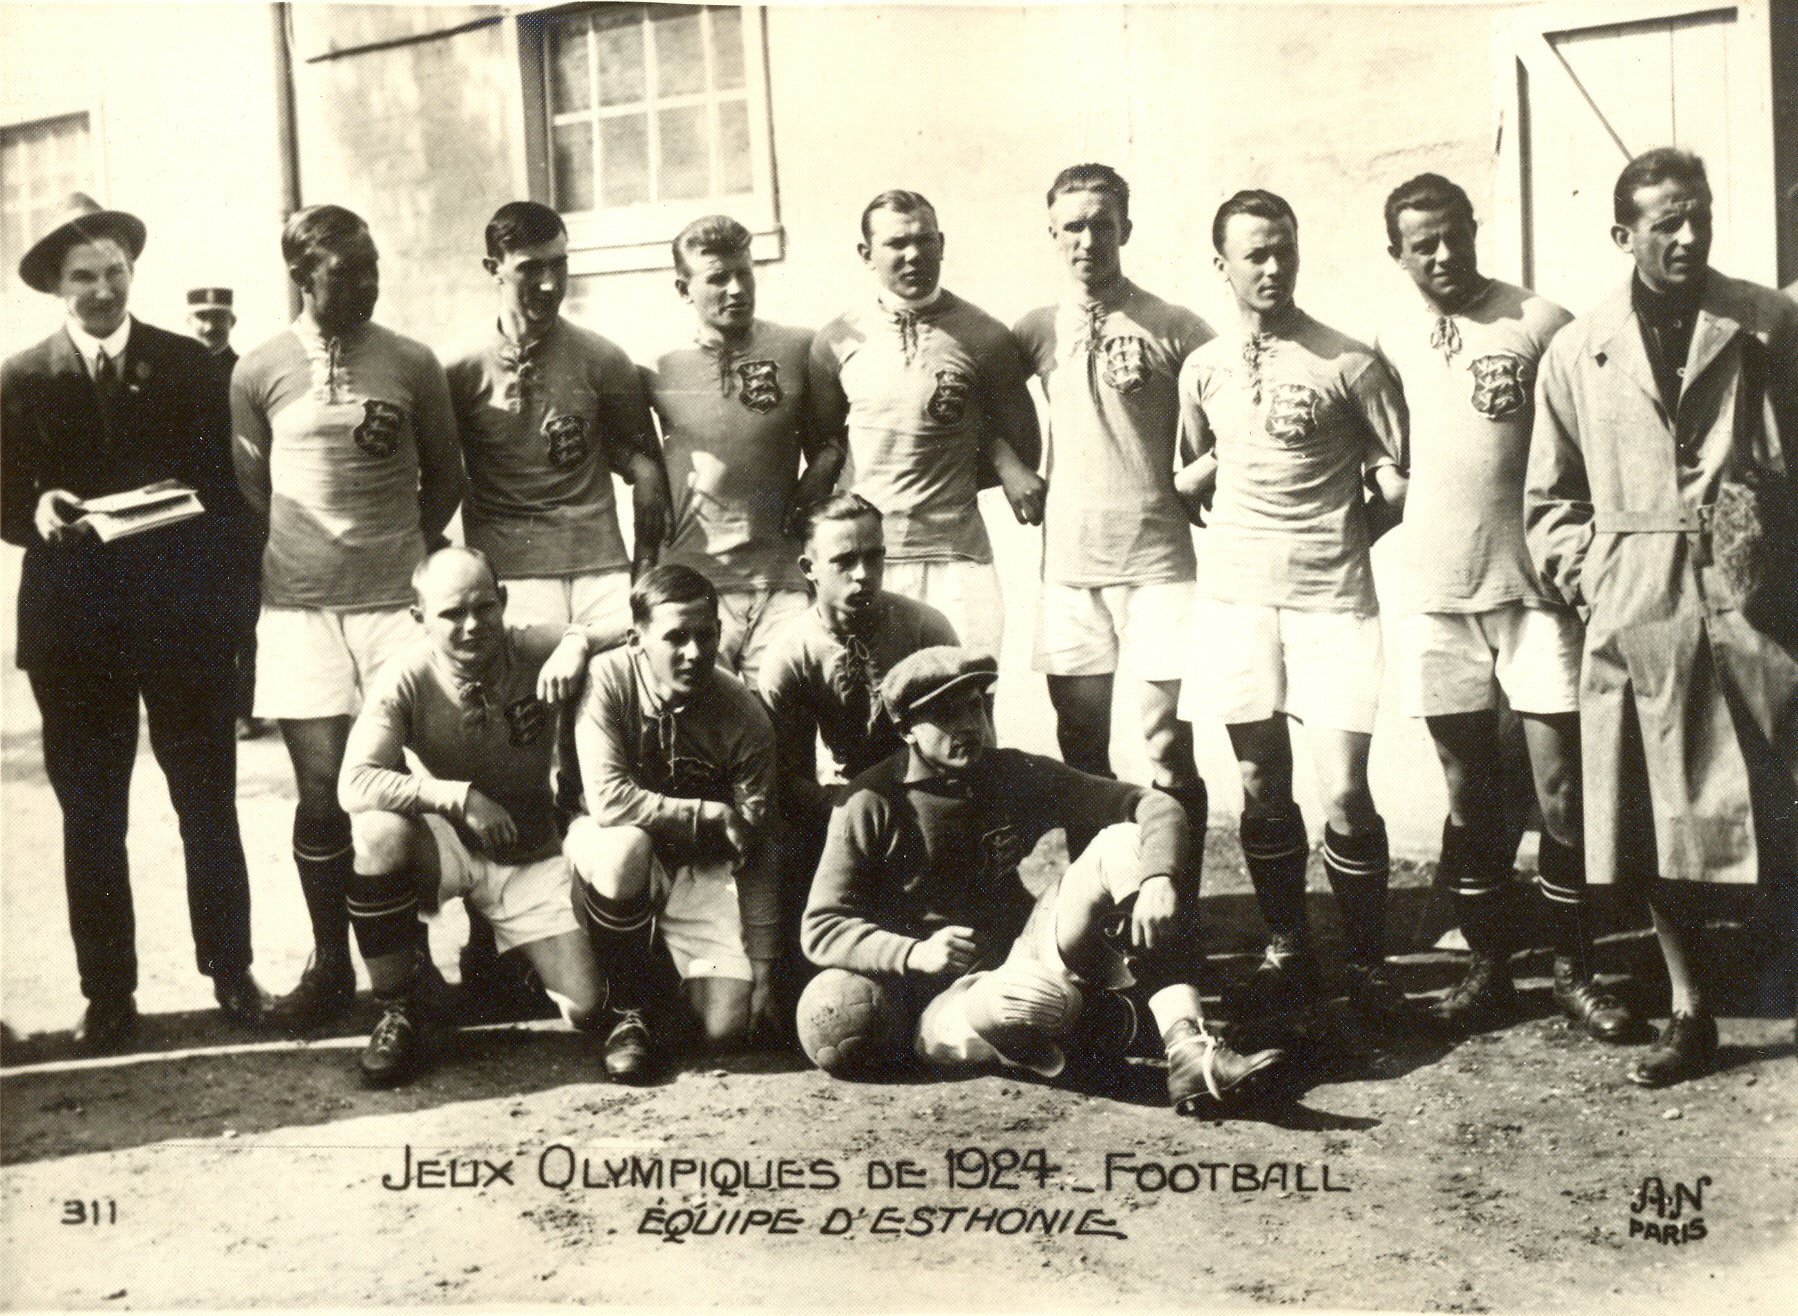 Eesti jalgpall on X: "94 YEARS AGO: On 25 May 1924 Estonia competed at the  Olympic Games in Paris. The historic match against USA ended with a narrow  0:1 defeat. #retro #eestikoondis #